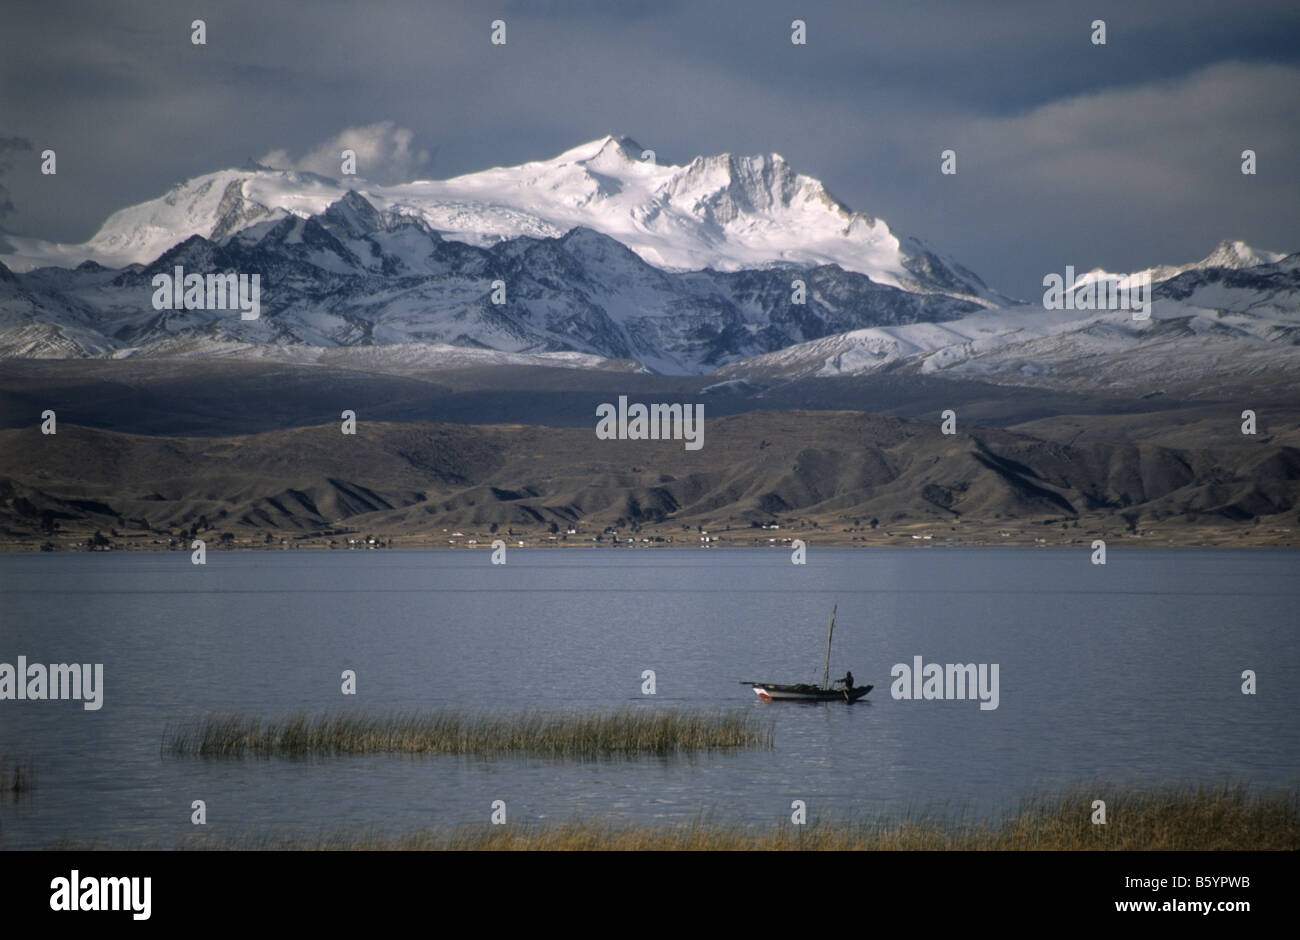 Small fishing boat, snowy peaks of the Cordillera Real mountain range in background, Lake Titicaca, Bolivia Stock Photo